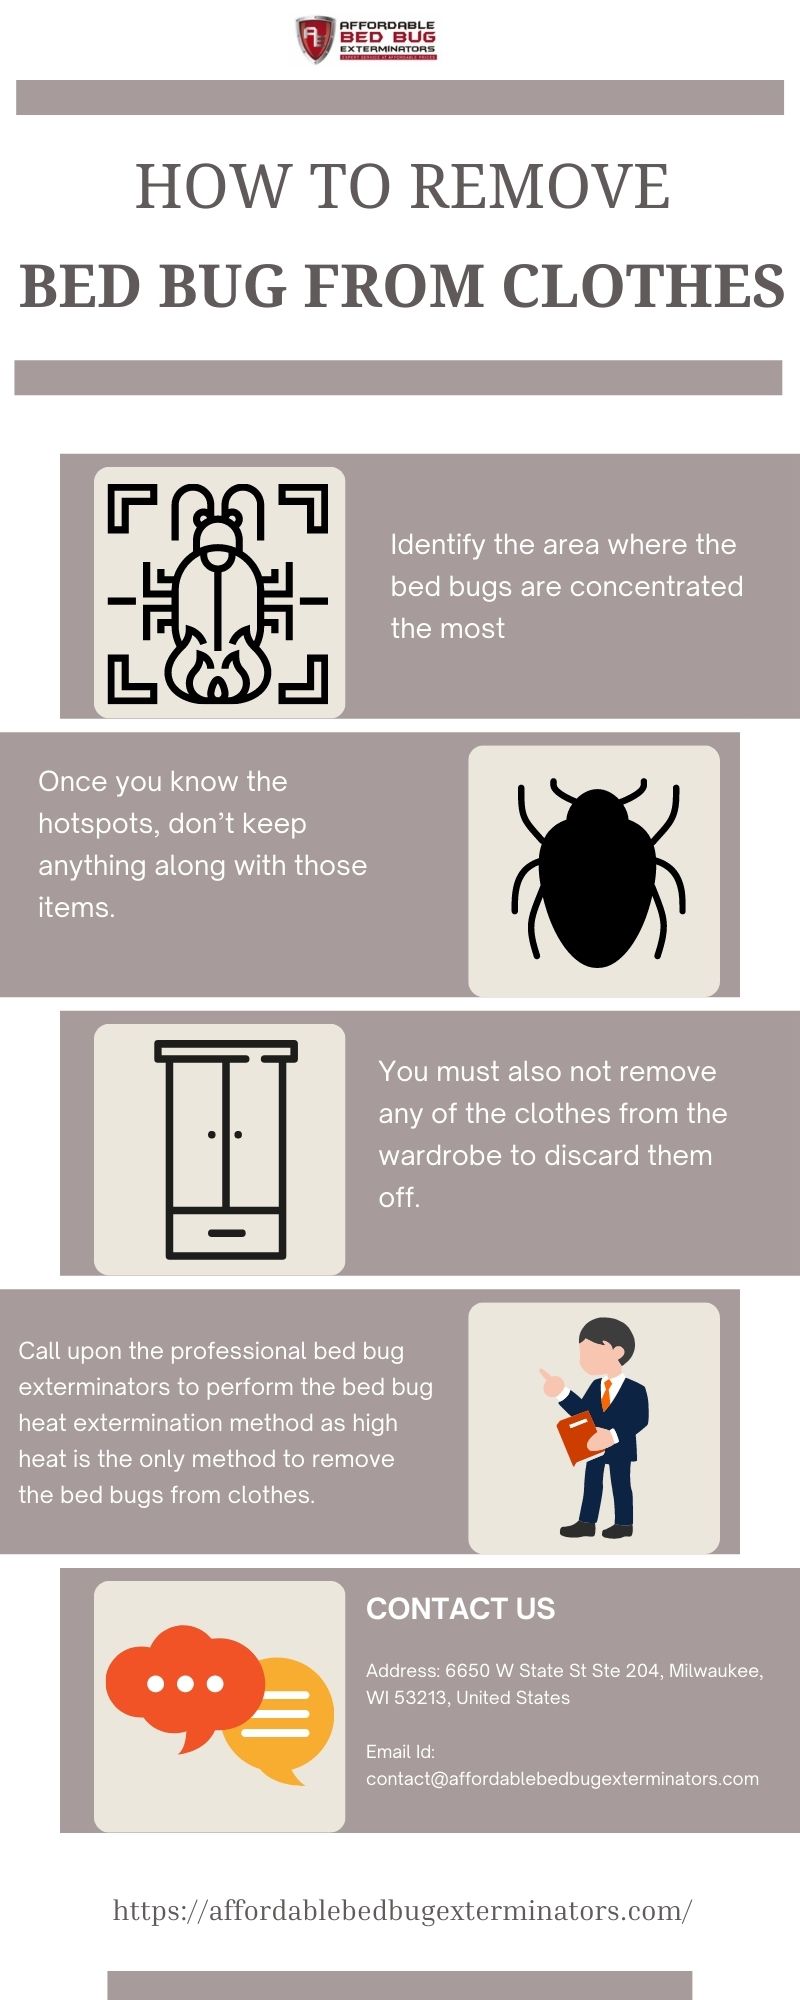 How to Remove bed bugs from clothes?